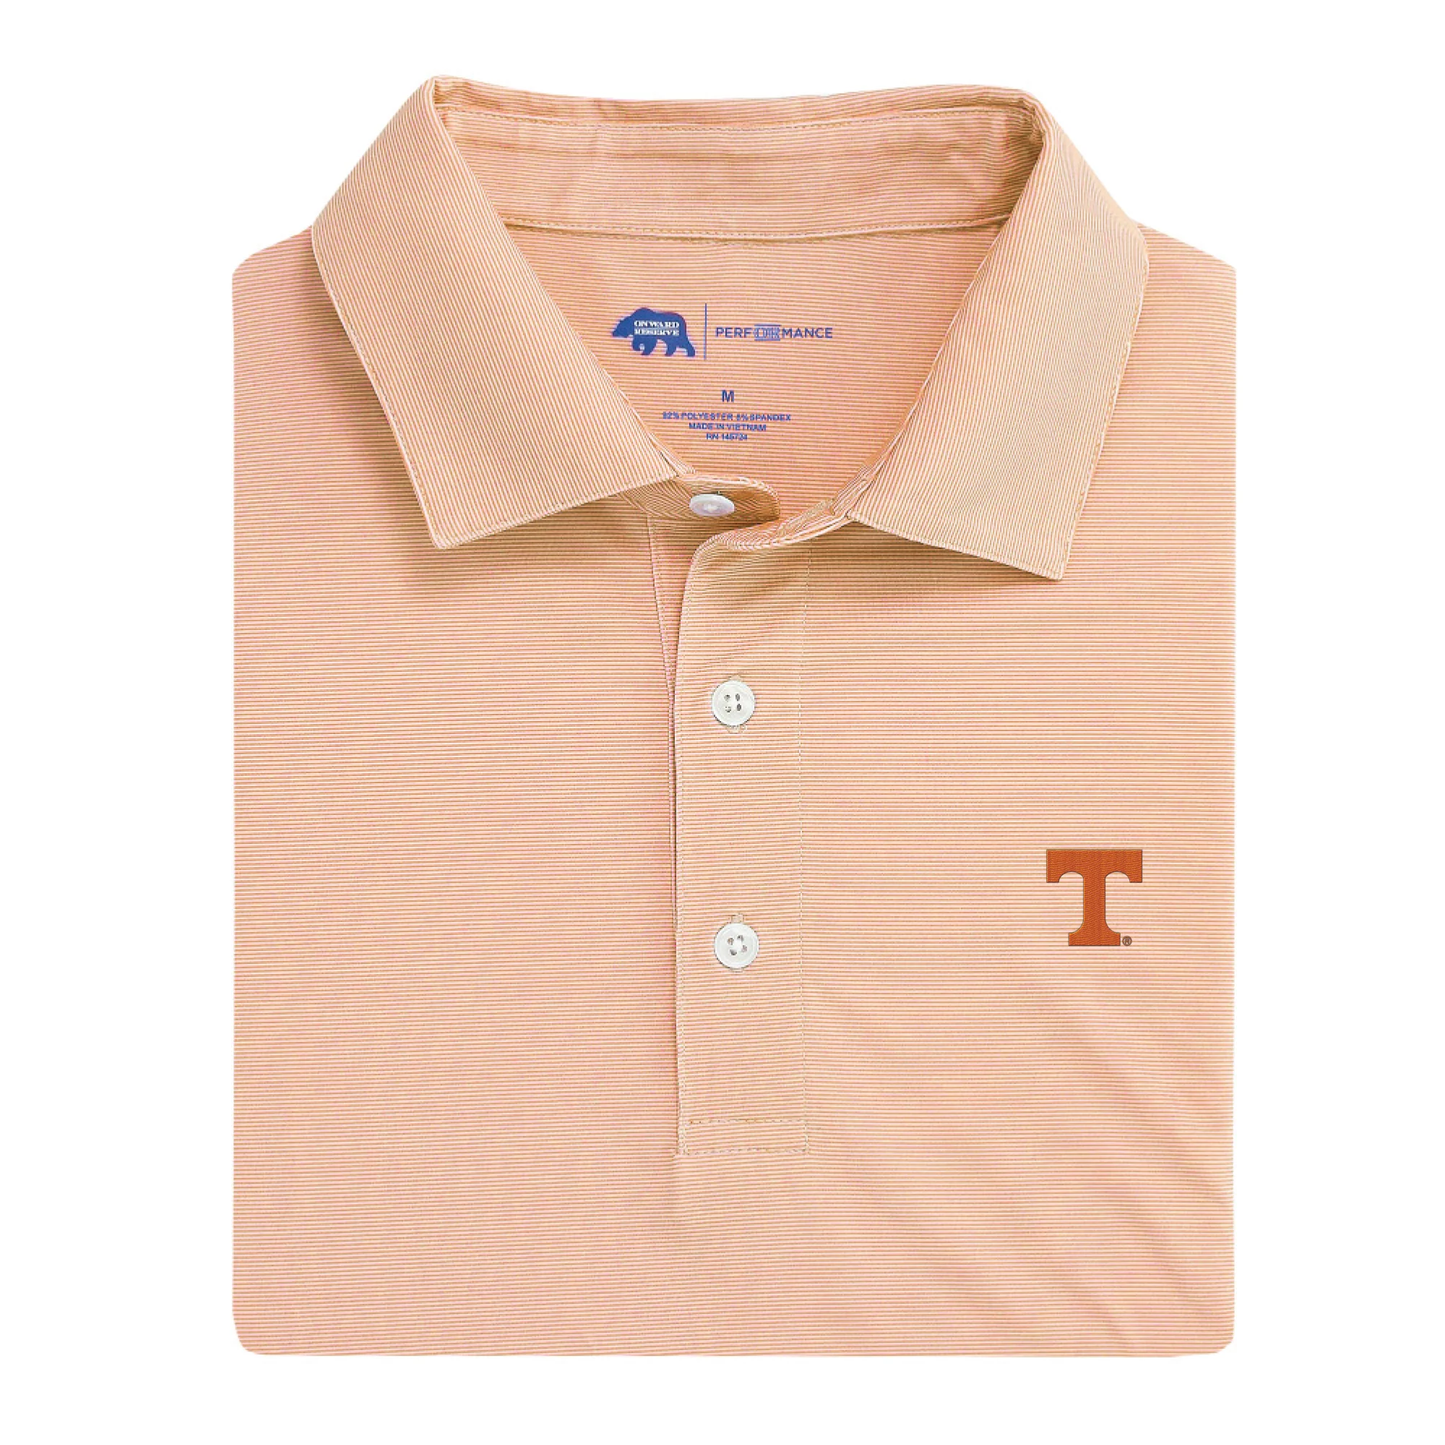 Hairline Stripe Tennessee Performance Polo